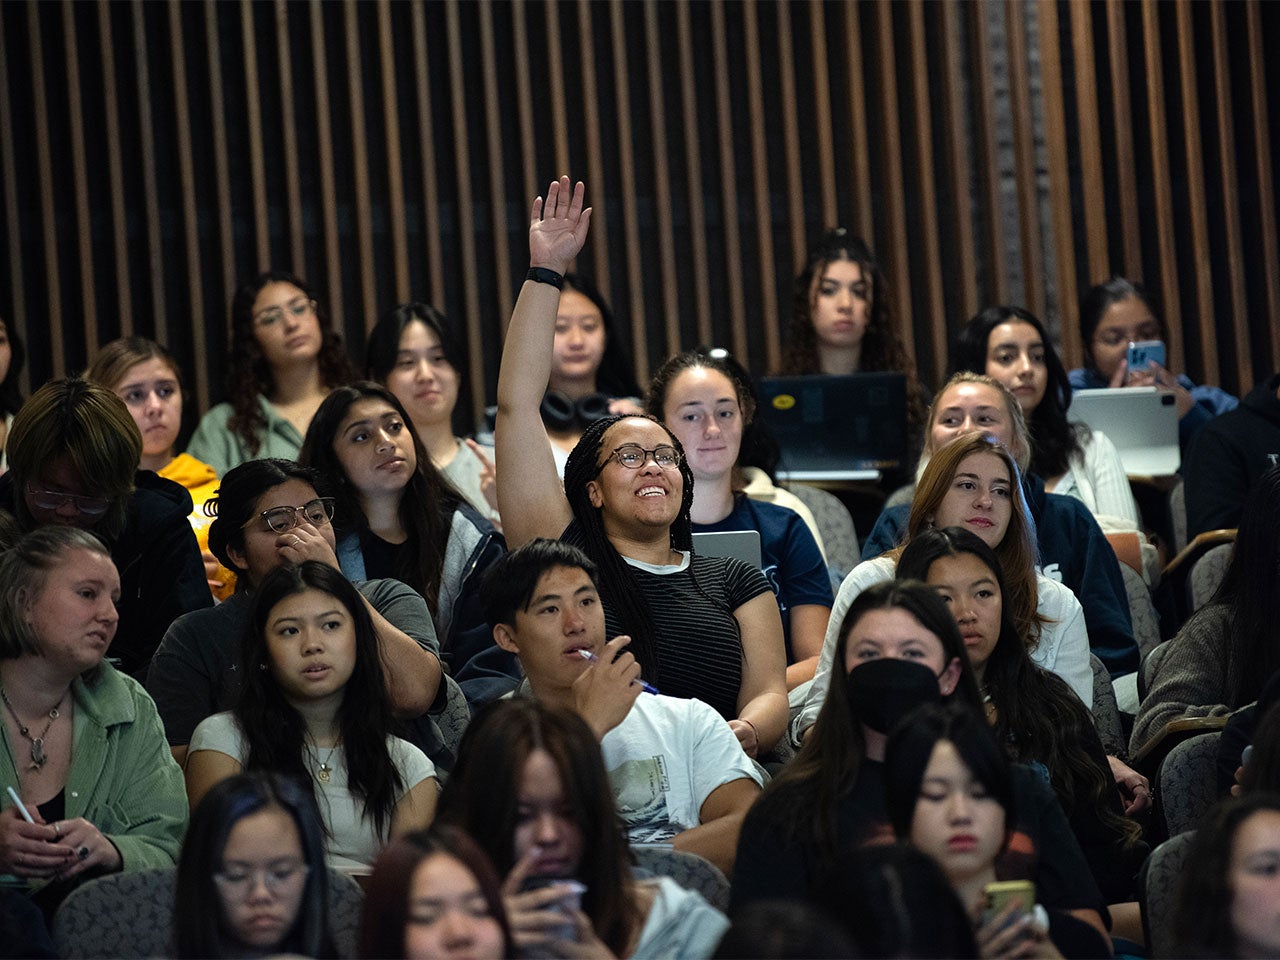 A student raises their hand and calls out a question from the back of the auditorium, surrounded by other students.